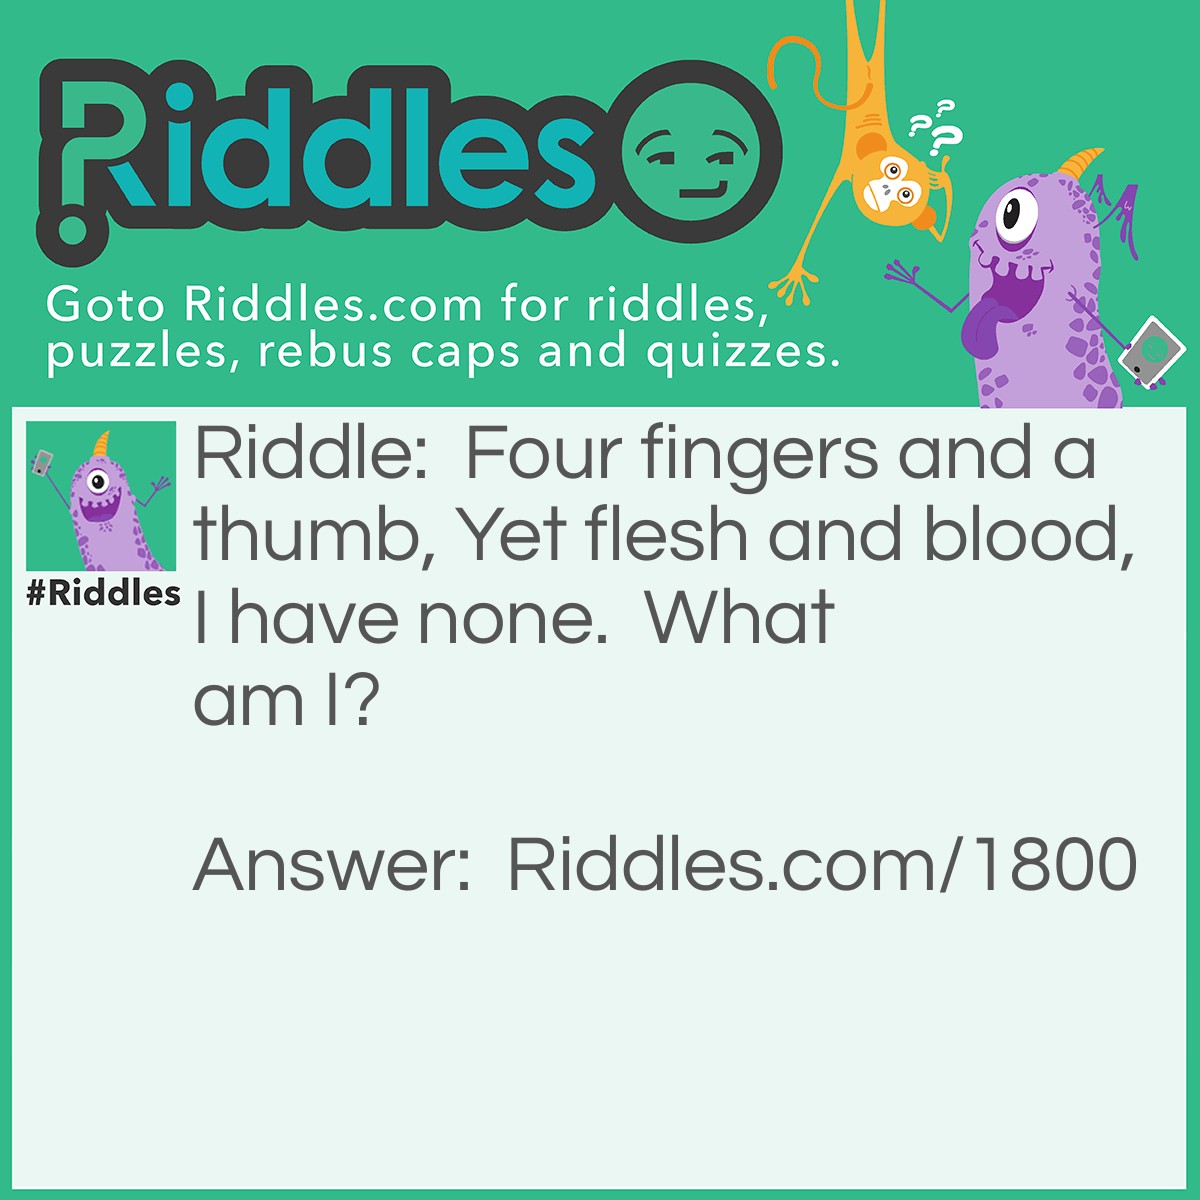 Riddle: Four fingers and a thumb,
Yet flesh and blood,
I have none. 
What am I?  Answer: A glove.